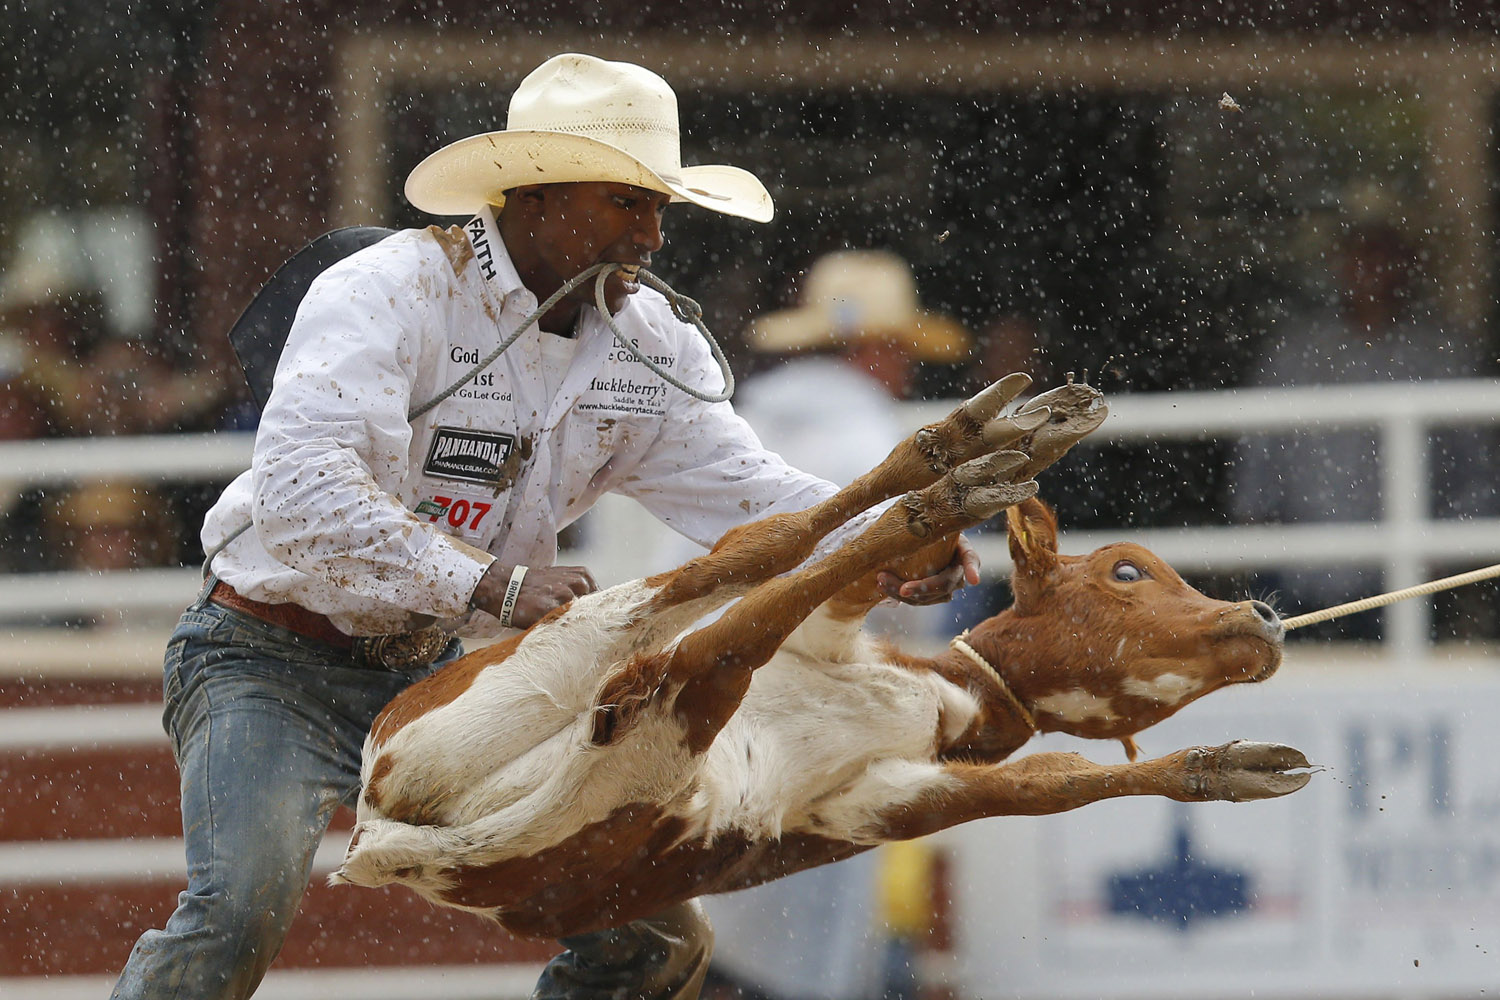 July 15, 2012. Cory Solomon of Prairieviw, Texas flips a steer on his way to winning the tie-down roping event and $100,000 during the finals at the 100th anniversary of the Calgary Stampede Rodeo in Calgary, Alberta.